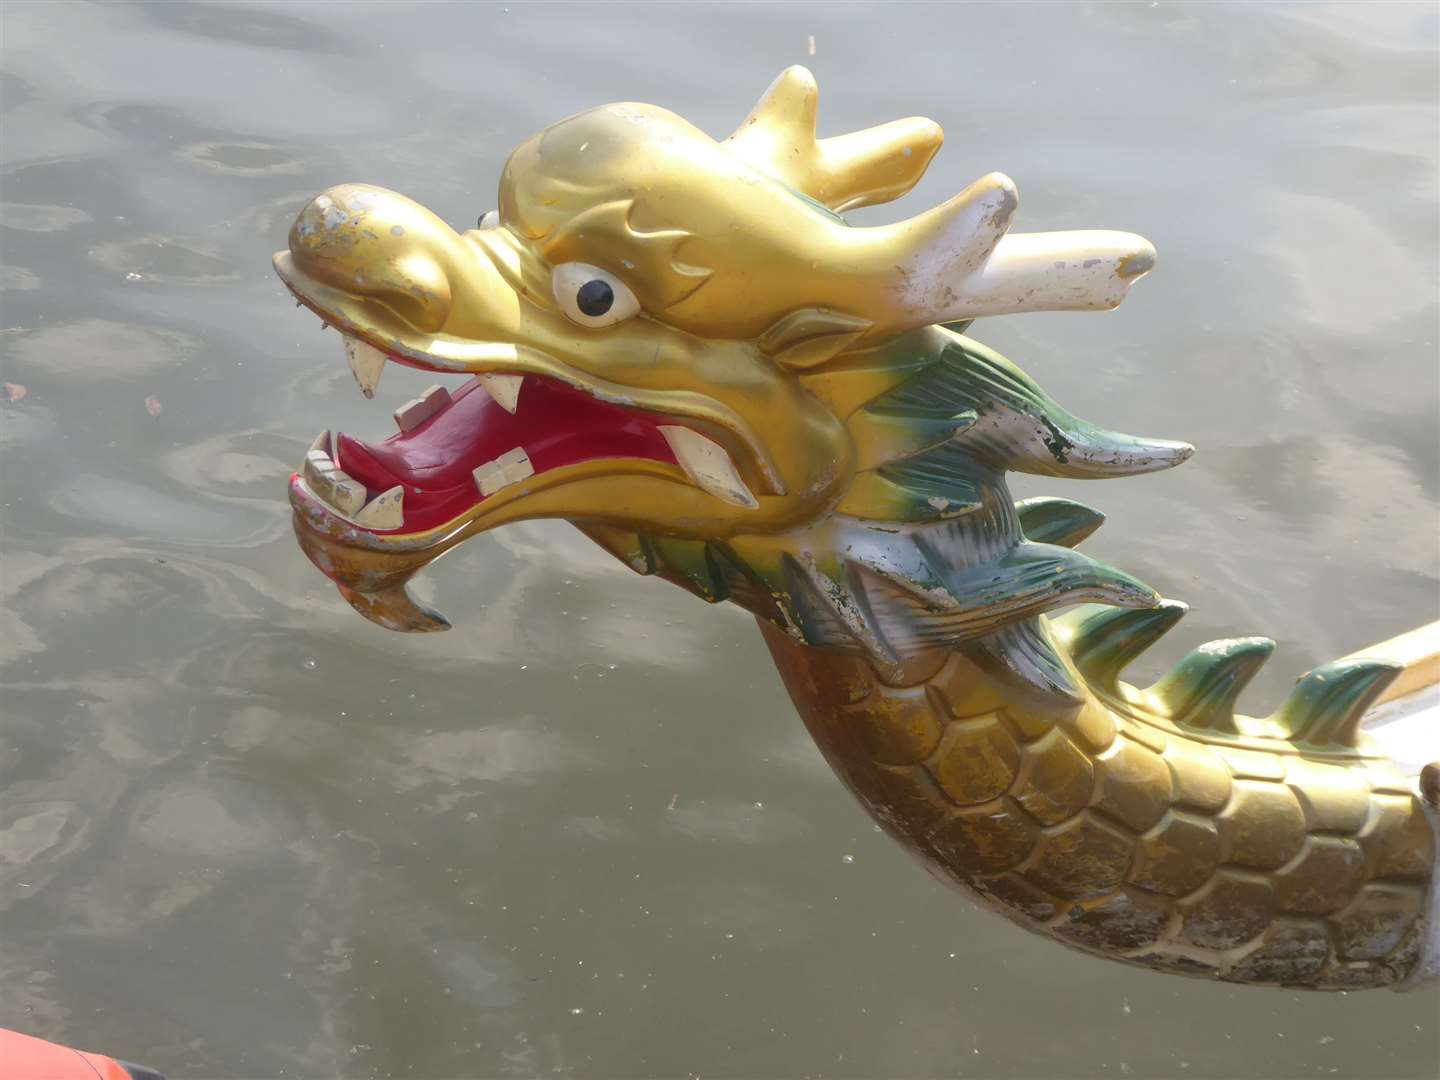 Watch the dragon boat racing as part of weekend events at the food festival